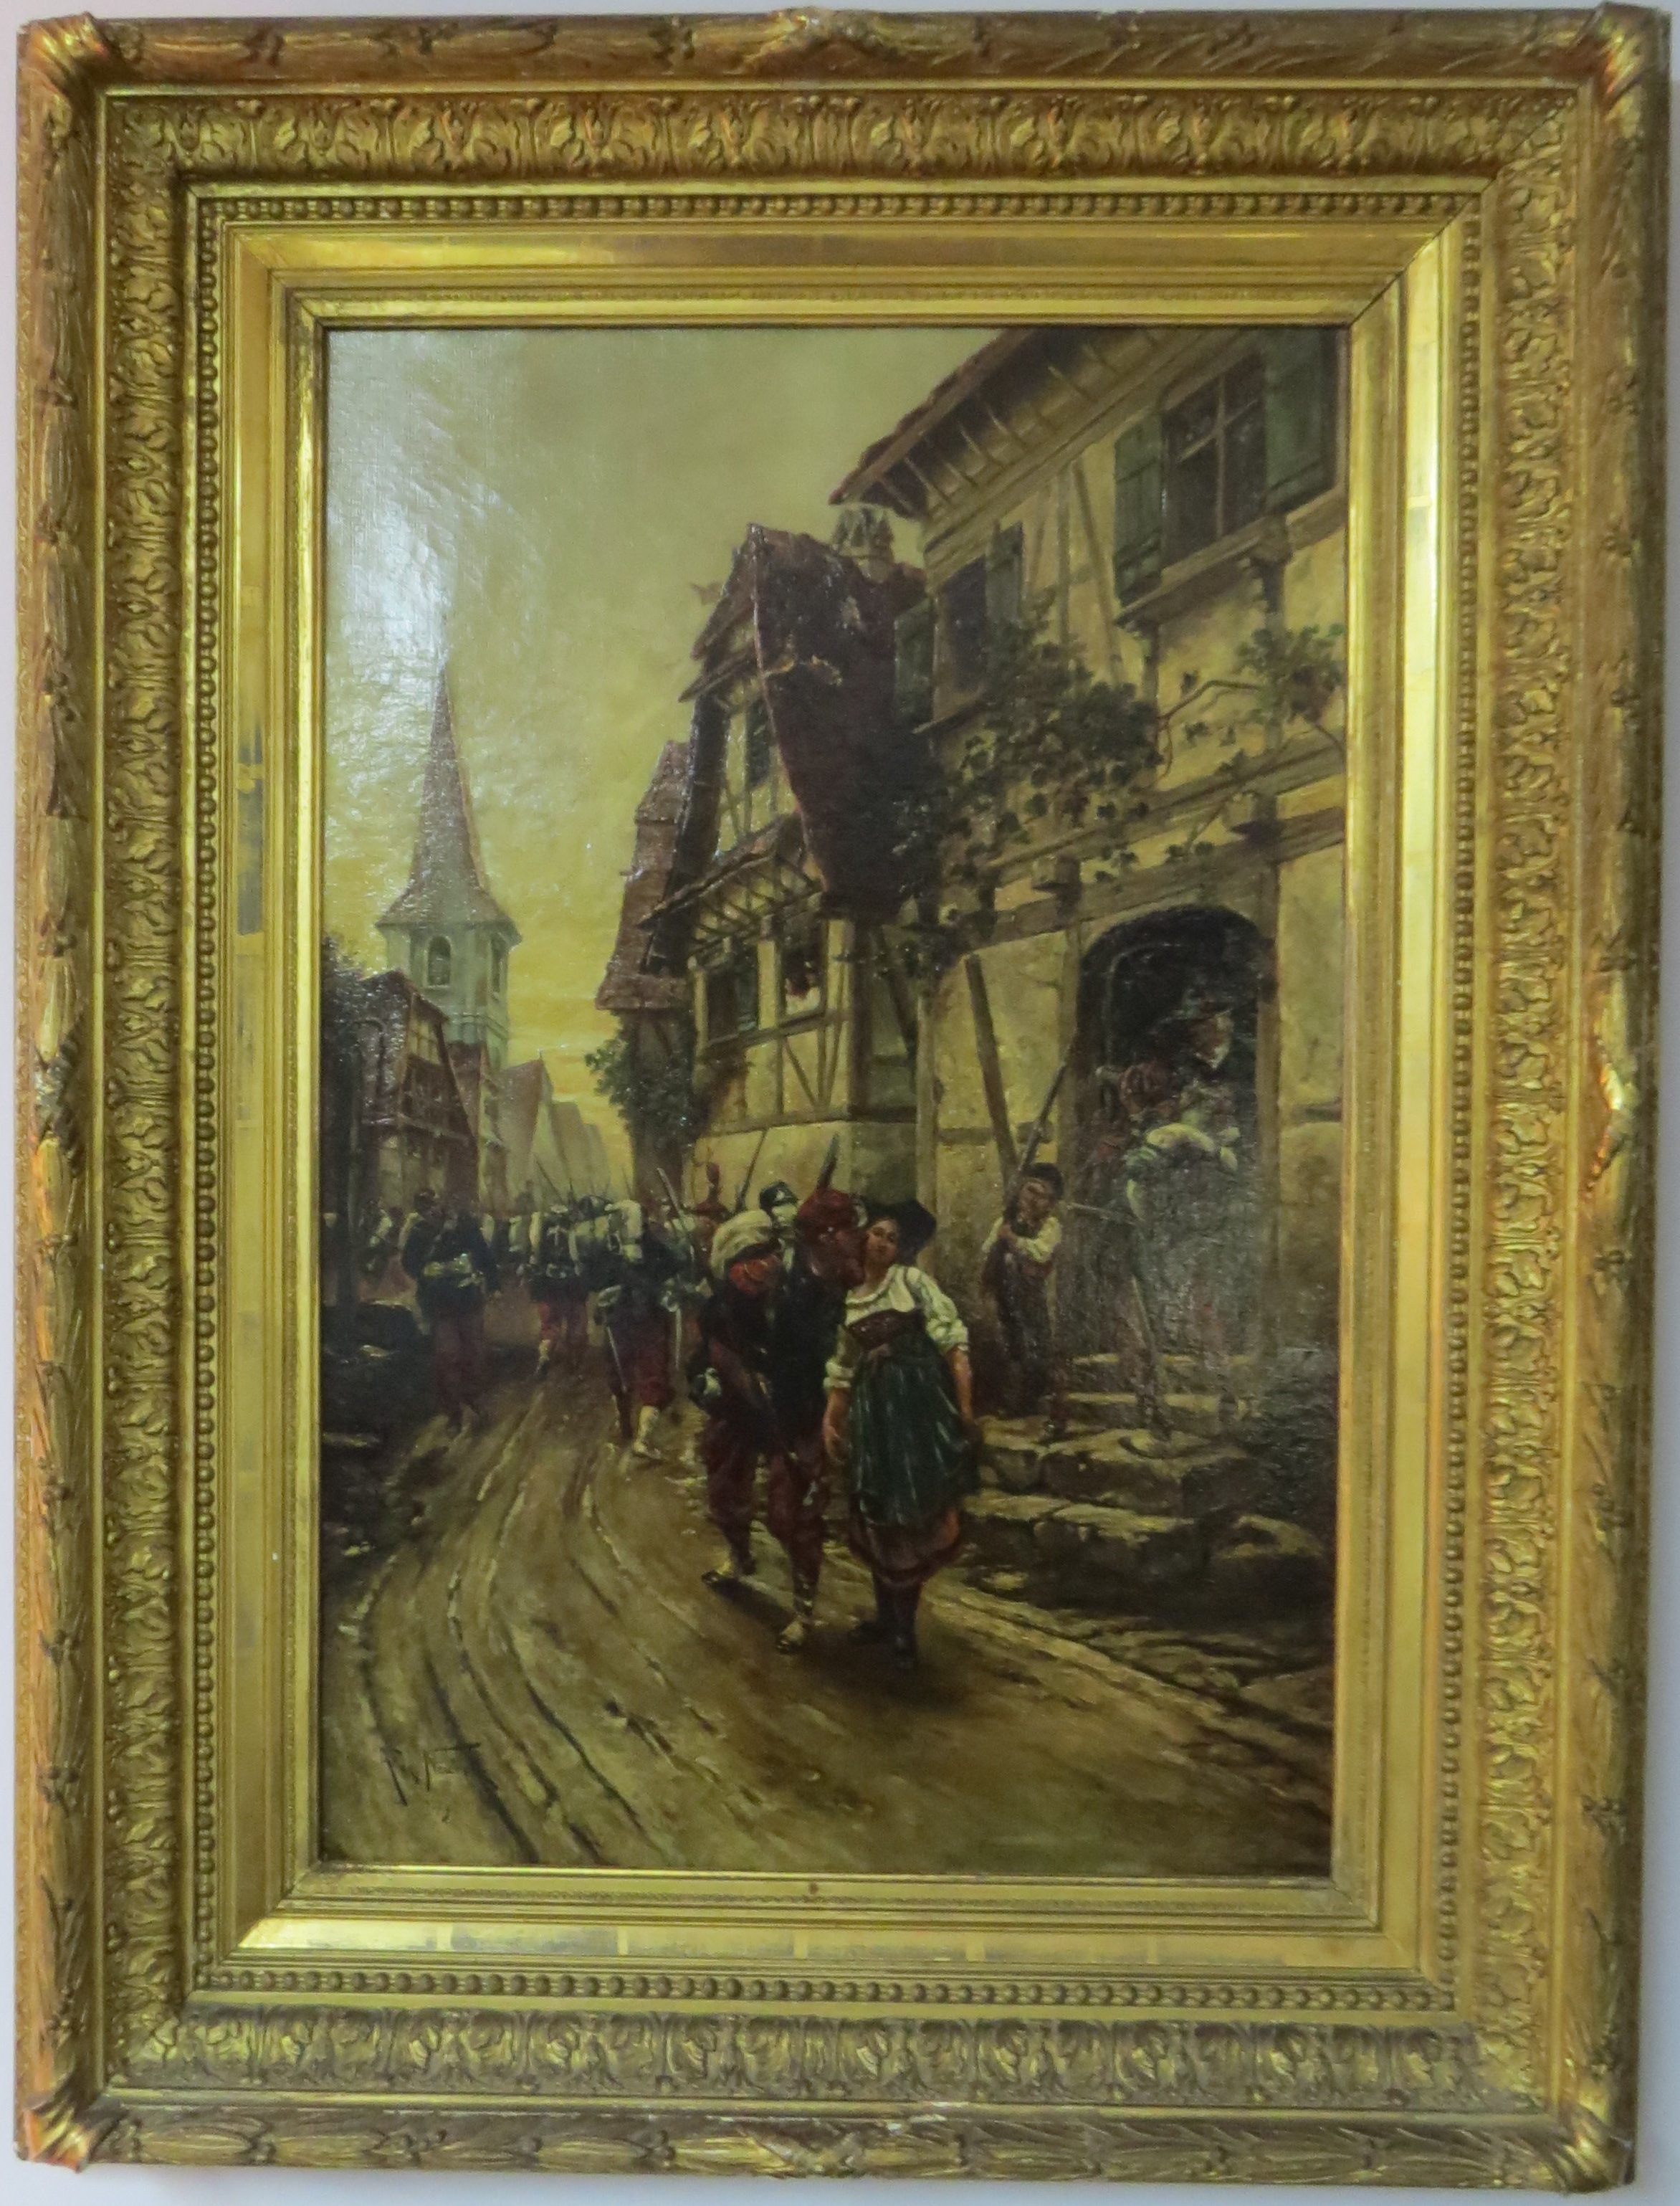 Oil on Canvas of a 19th Century French Village, signed A. de Neuville (1879)